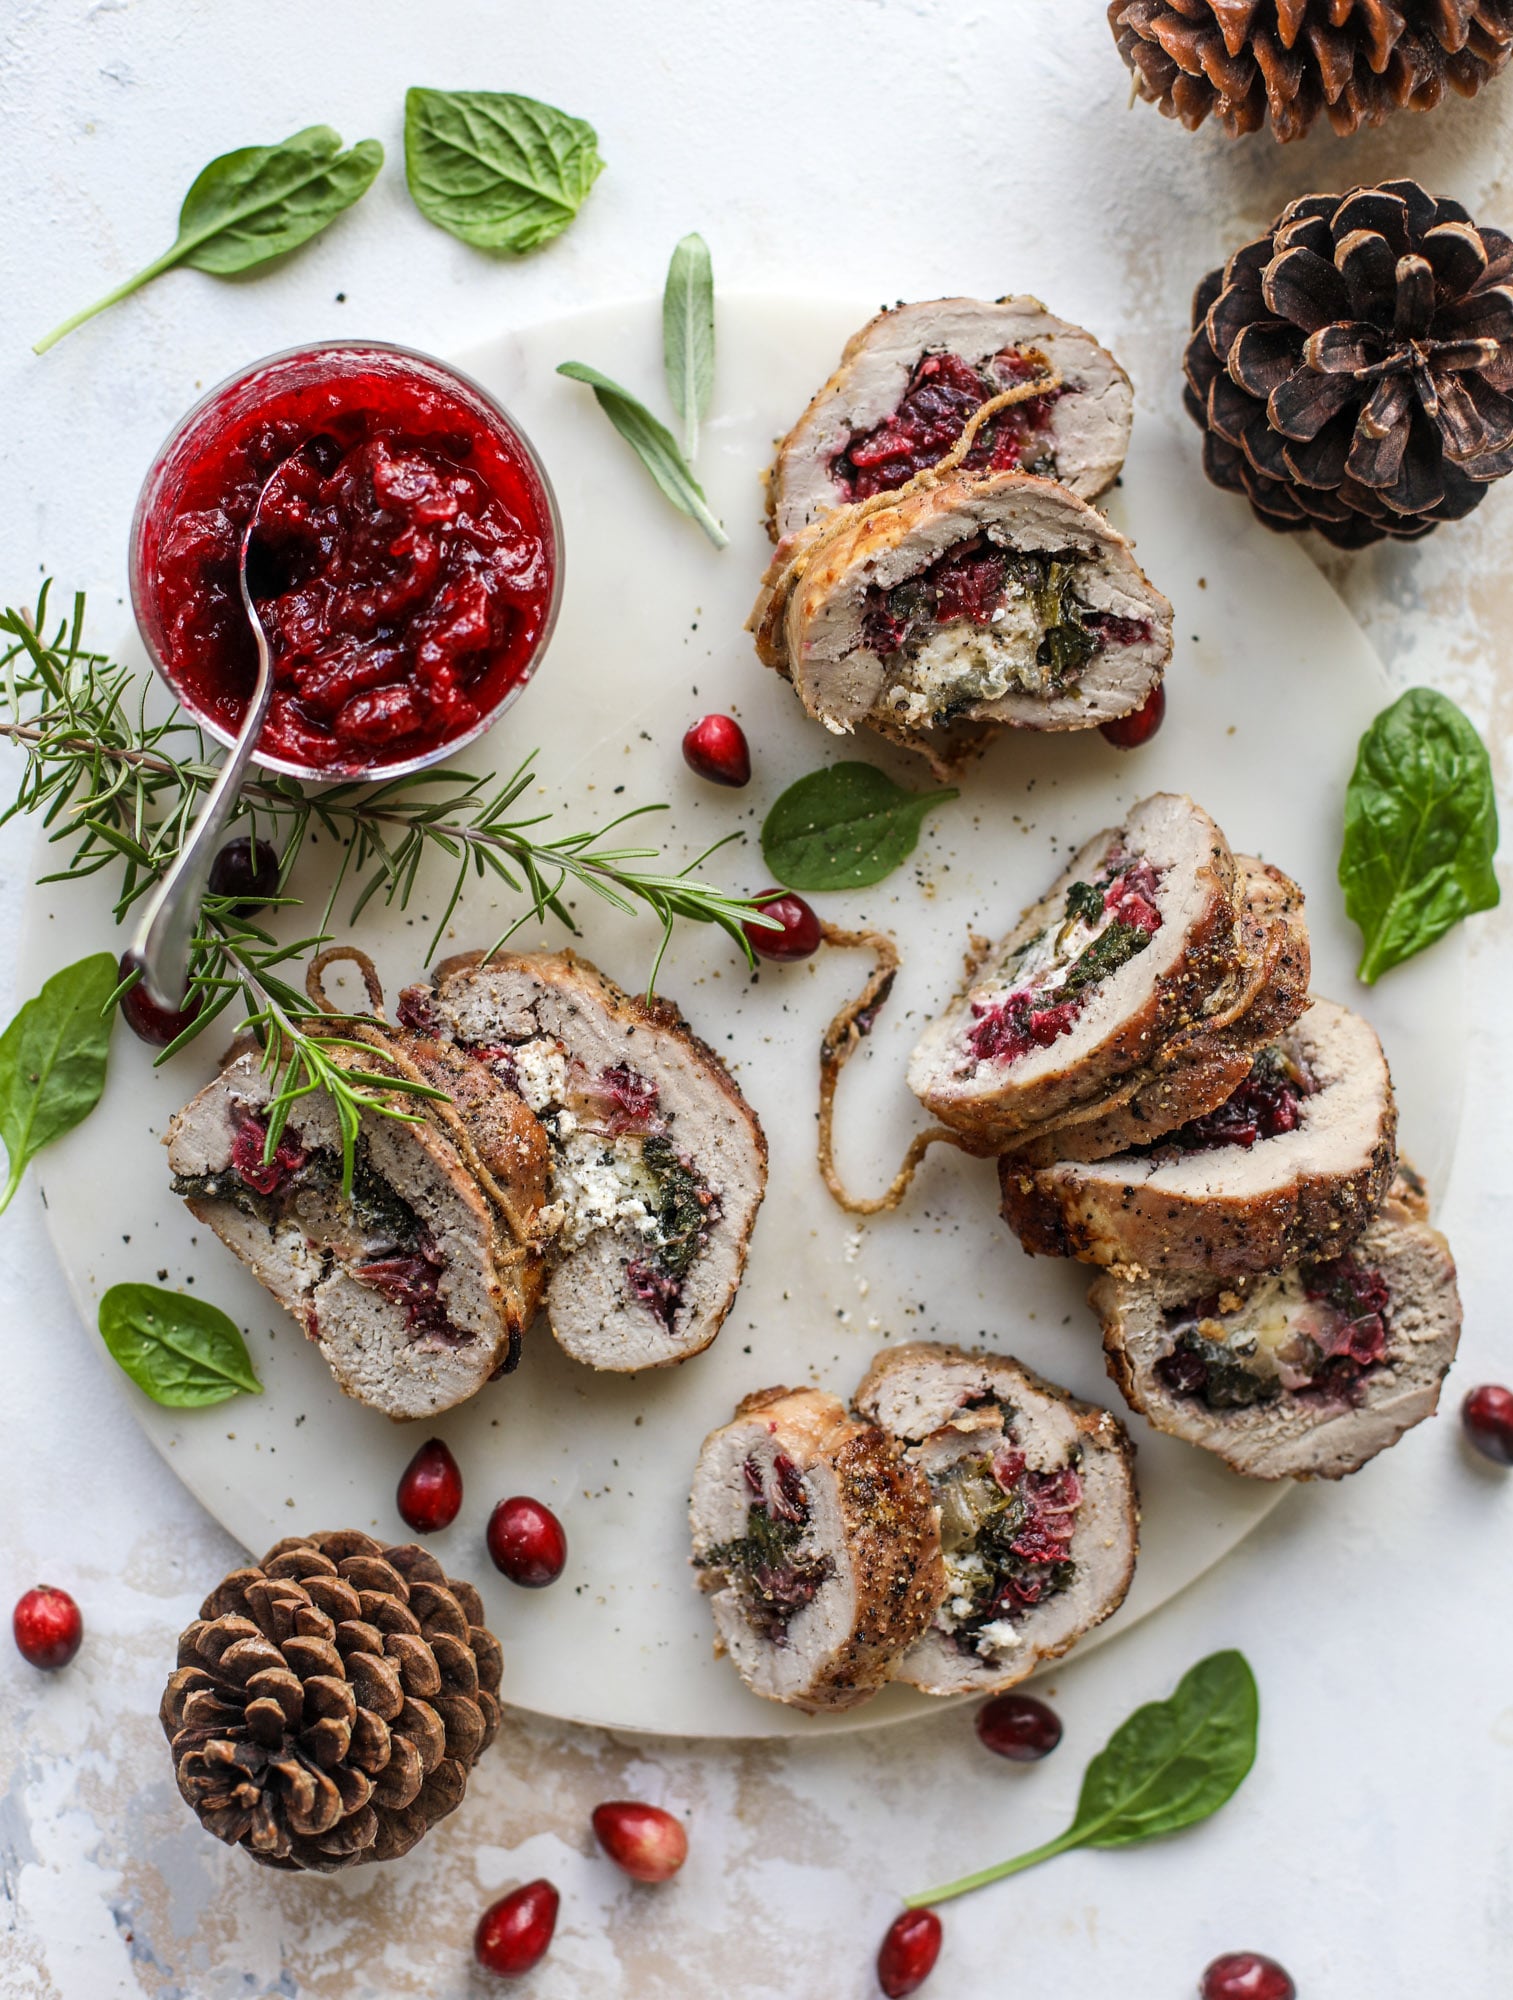 This holiday stuffed pork tenderloin is filled with caramelized onion, fresh cranberry sauce, goat cheese and fresh spinach. It's a show stopped and super delicious, along with being fairly simple to make! I howsweeteats.com #stuffed #porktenderloin